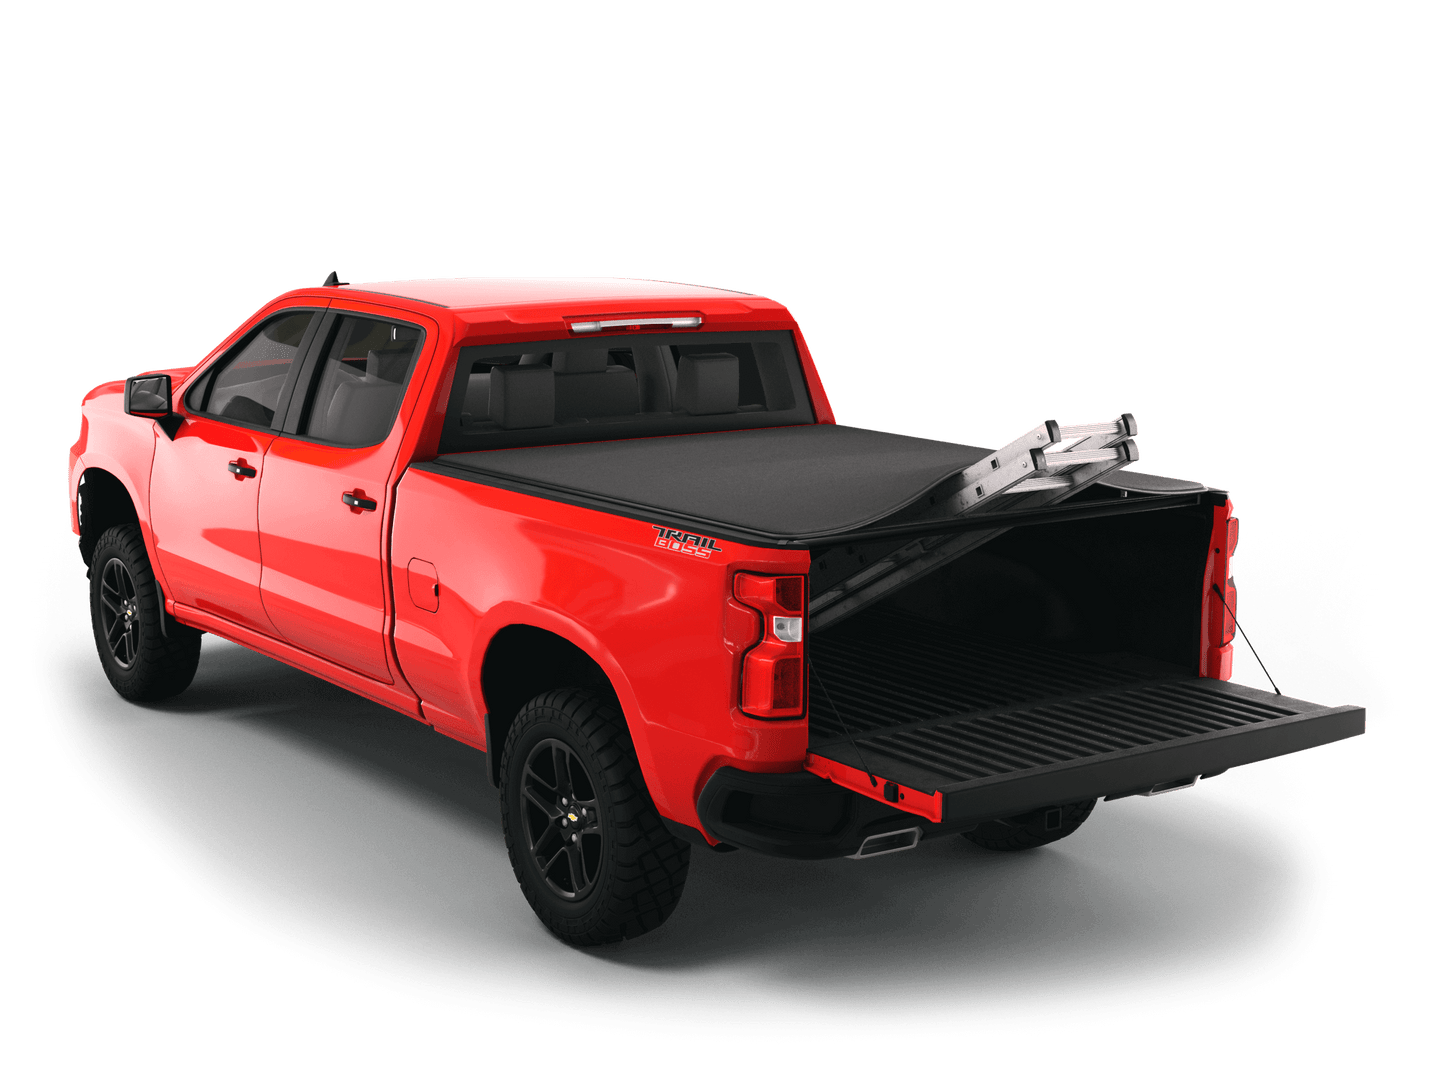 Red Chevrolet Silverado 2500HD / 3500 HD / GMC Sierra 2500HD / 3500HD with Sawtooth Stretch expandable tonneau cover rolled up at cab